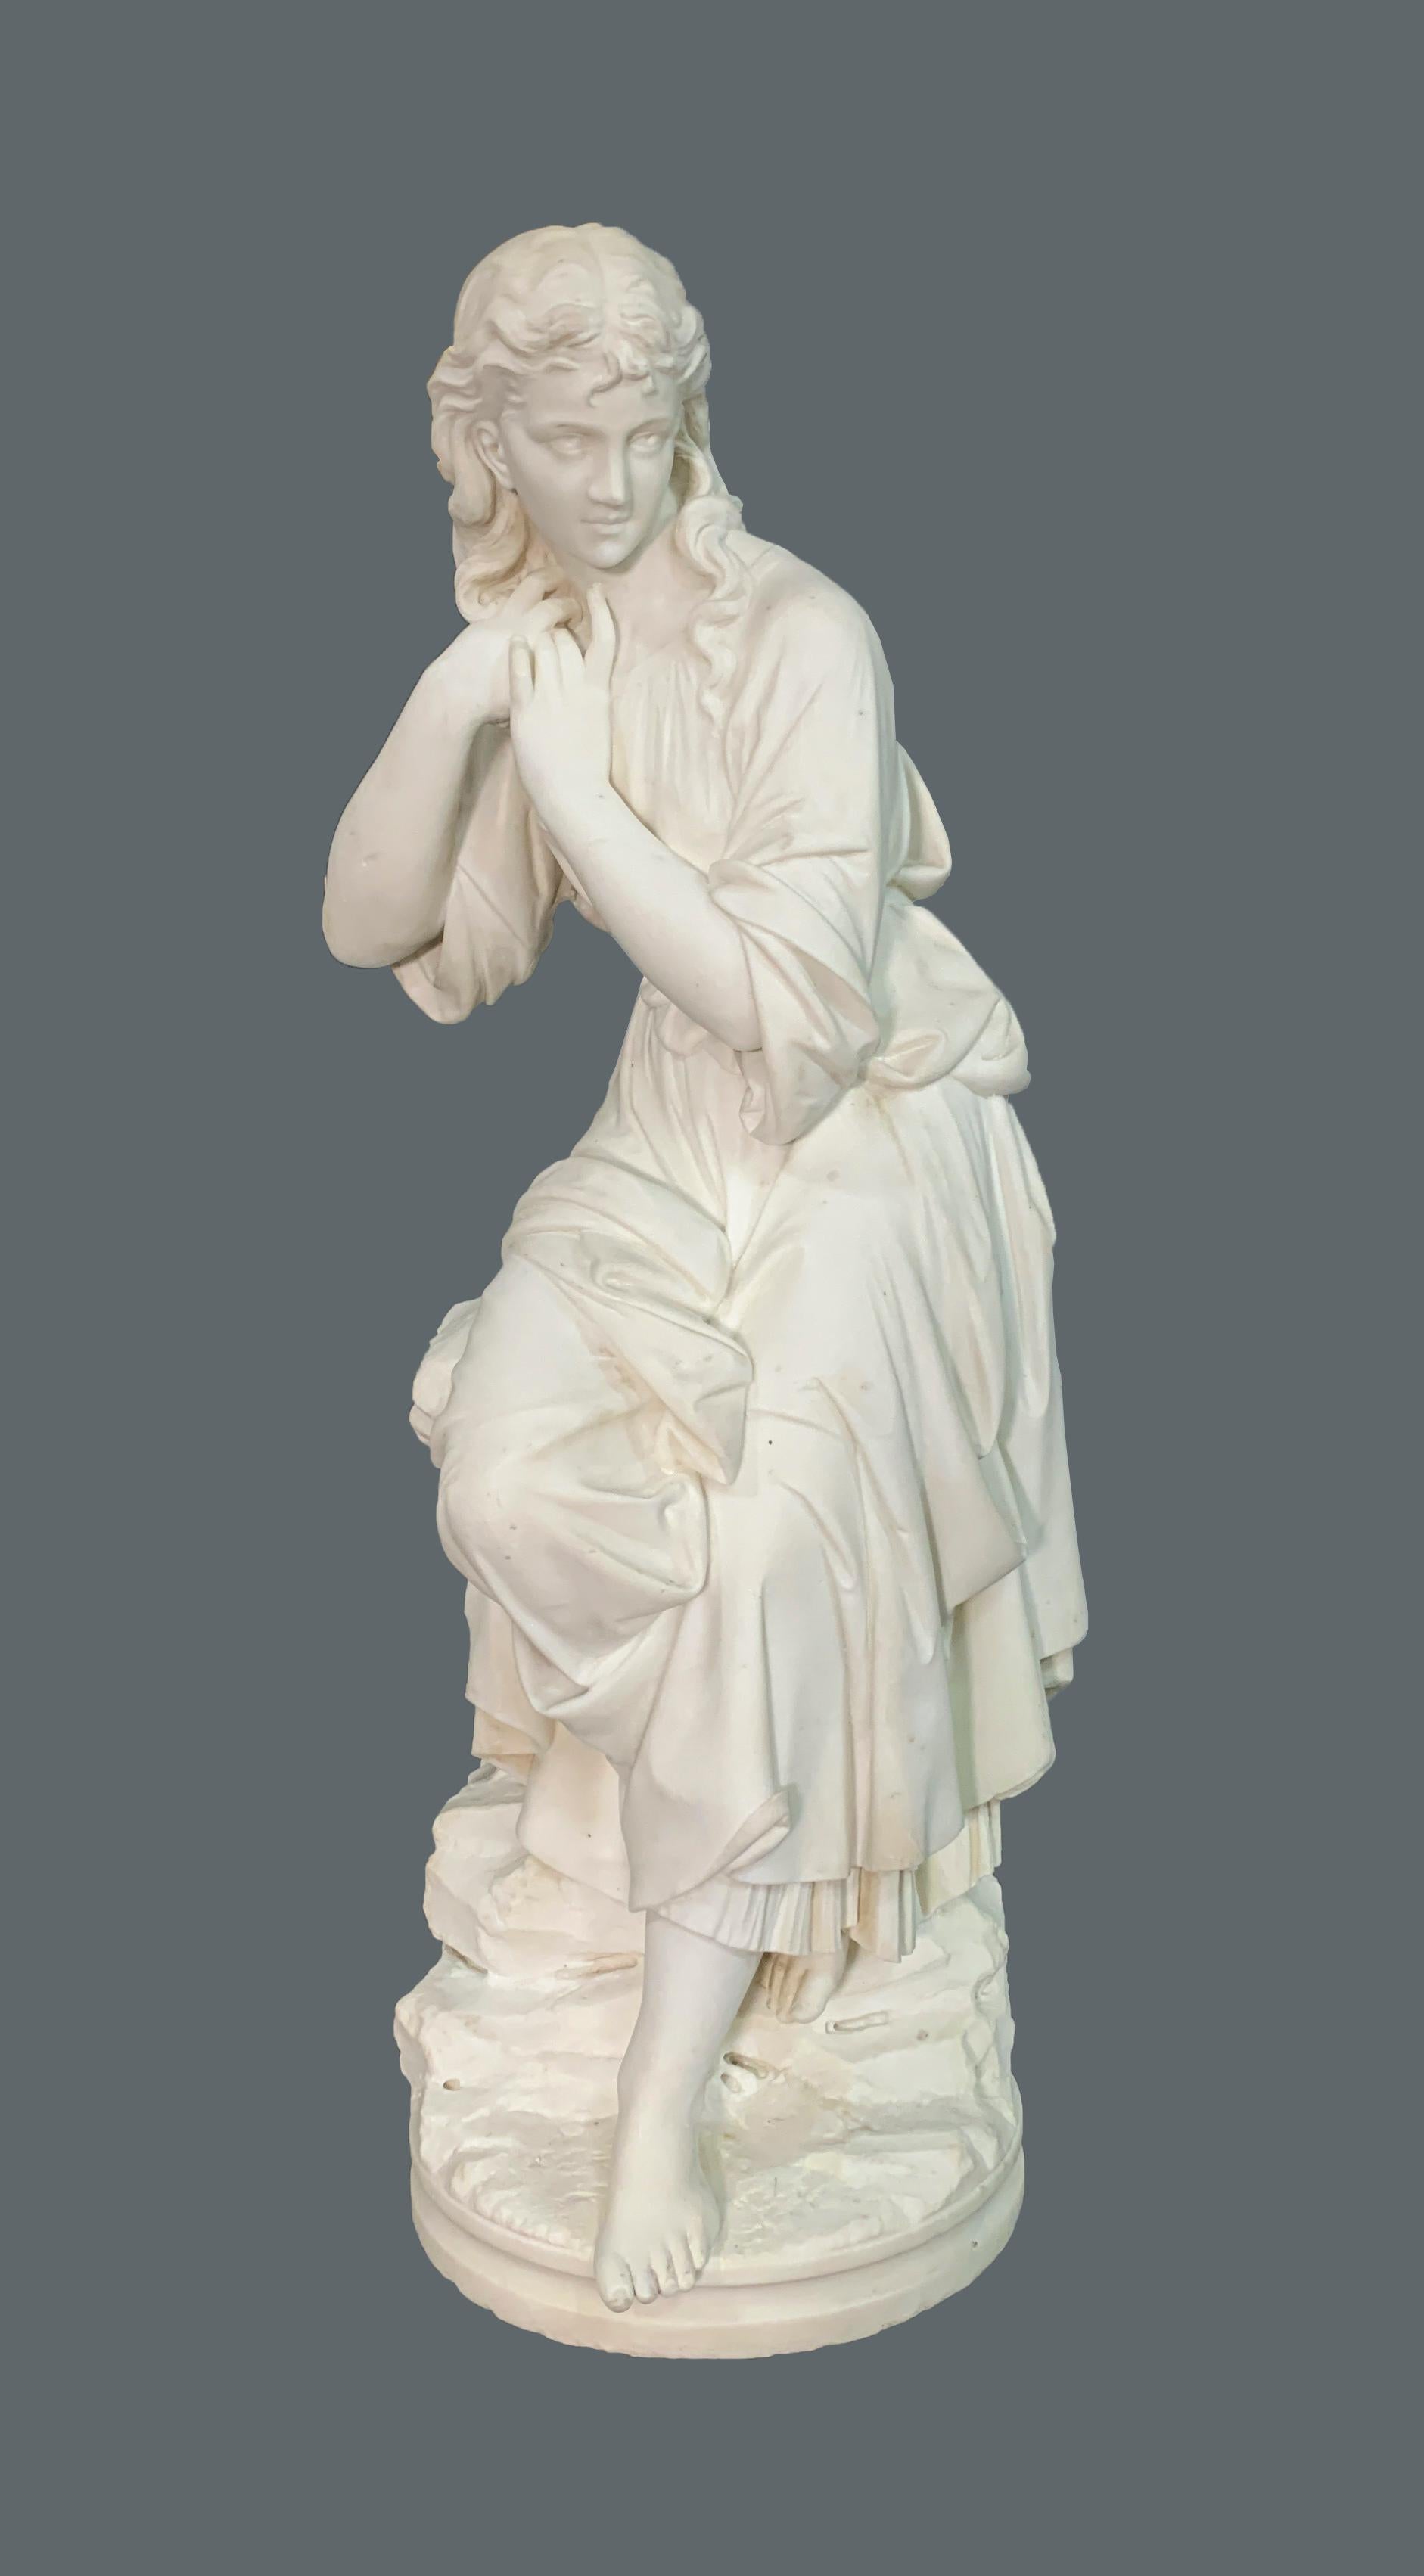 This magnificent Italian marble figure depicts a woman sitting atop a stone,
The details on her dress show it flowing carelessly by her feet, as she rests on an intricately designed rock. She carefully tussles her hair and looks off into the